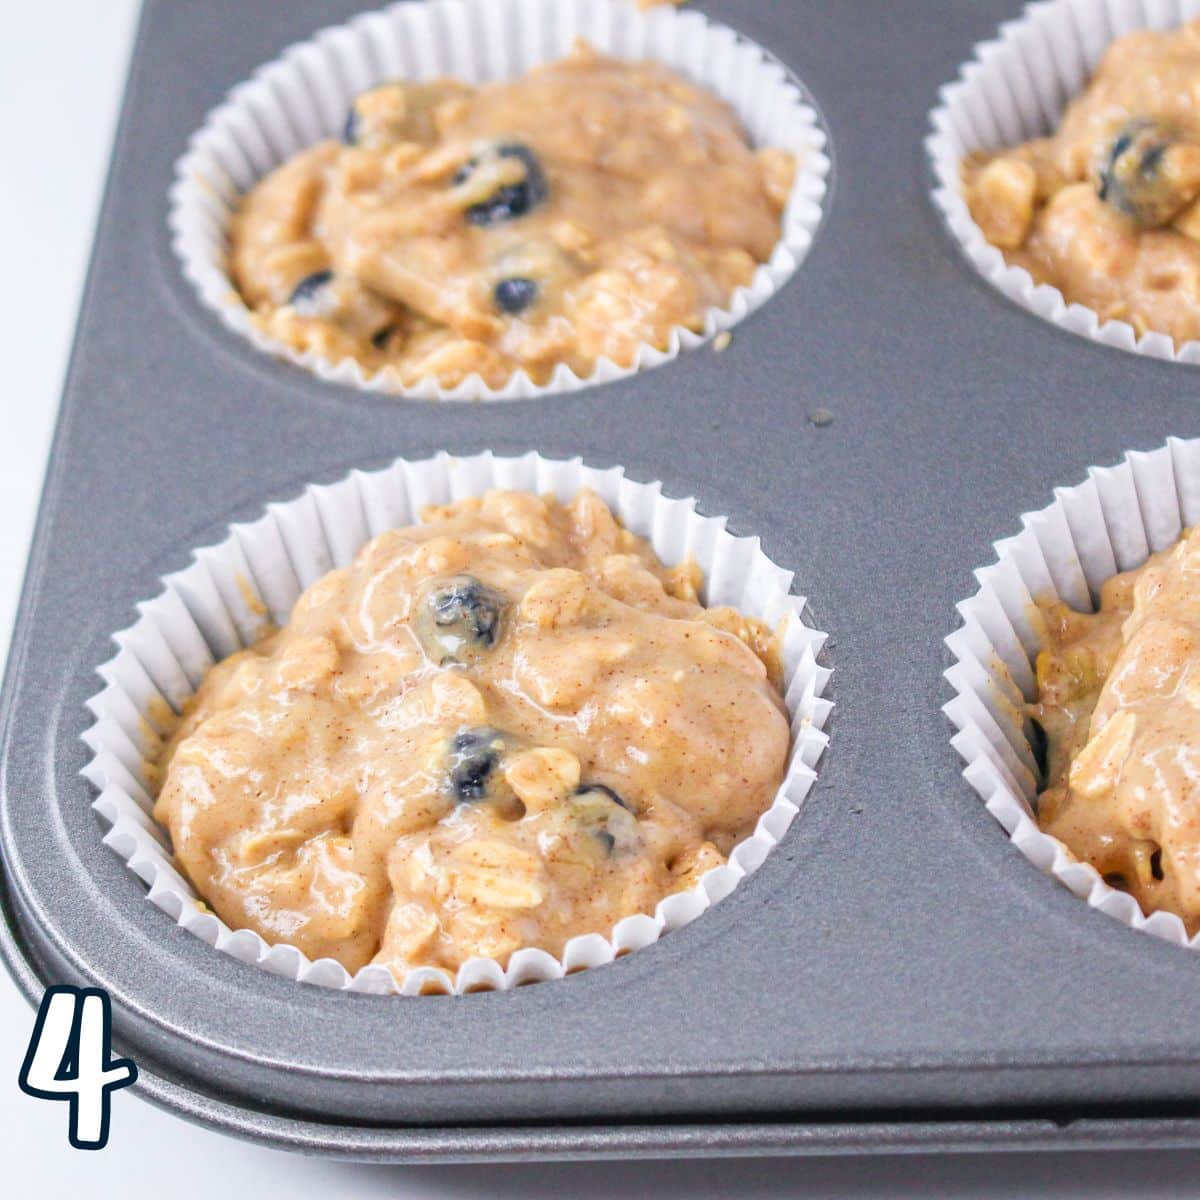 Blueberry oatmeal muffins in a muffin tin.